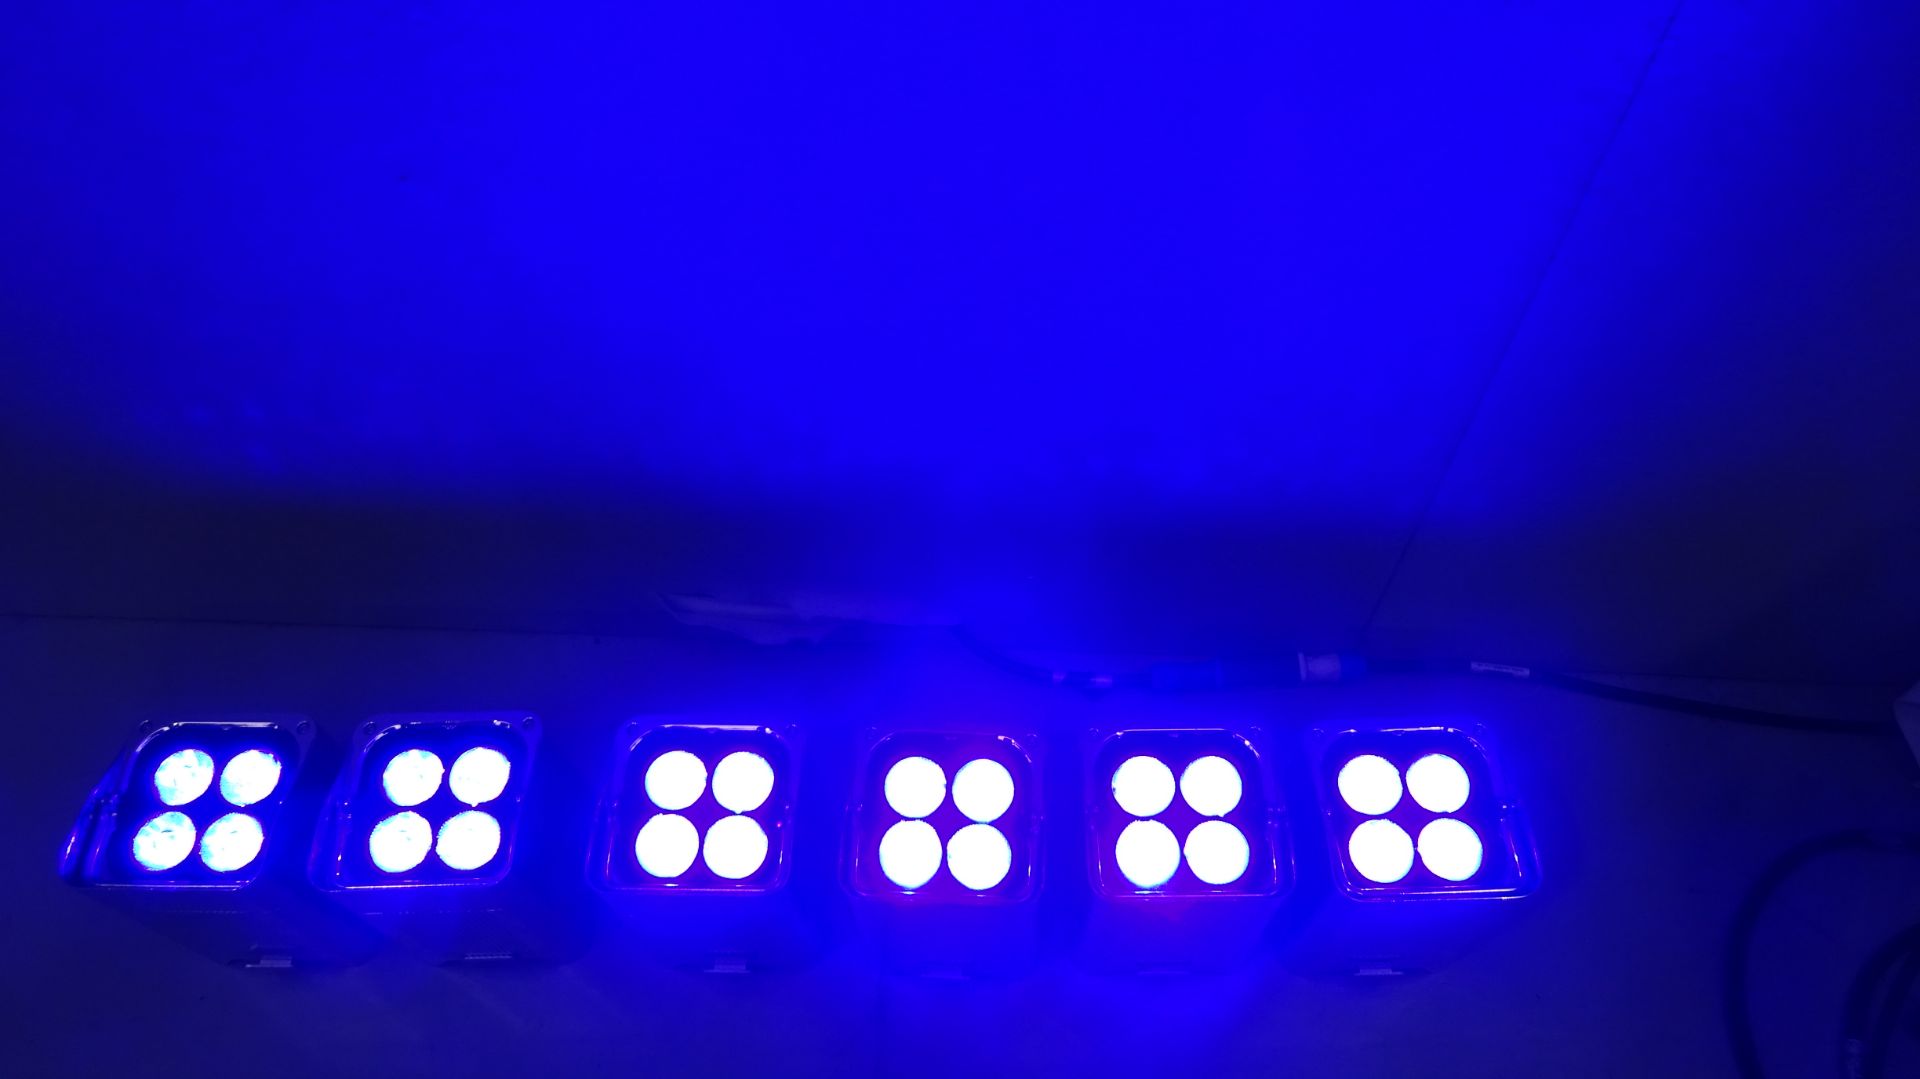 6 x Chauvet Well Fit Wireless IP65 Rated LED RGBA Battery UpLights c/w Flight Case Charging - Image 2 of 12